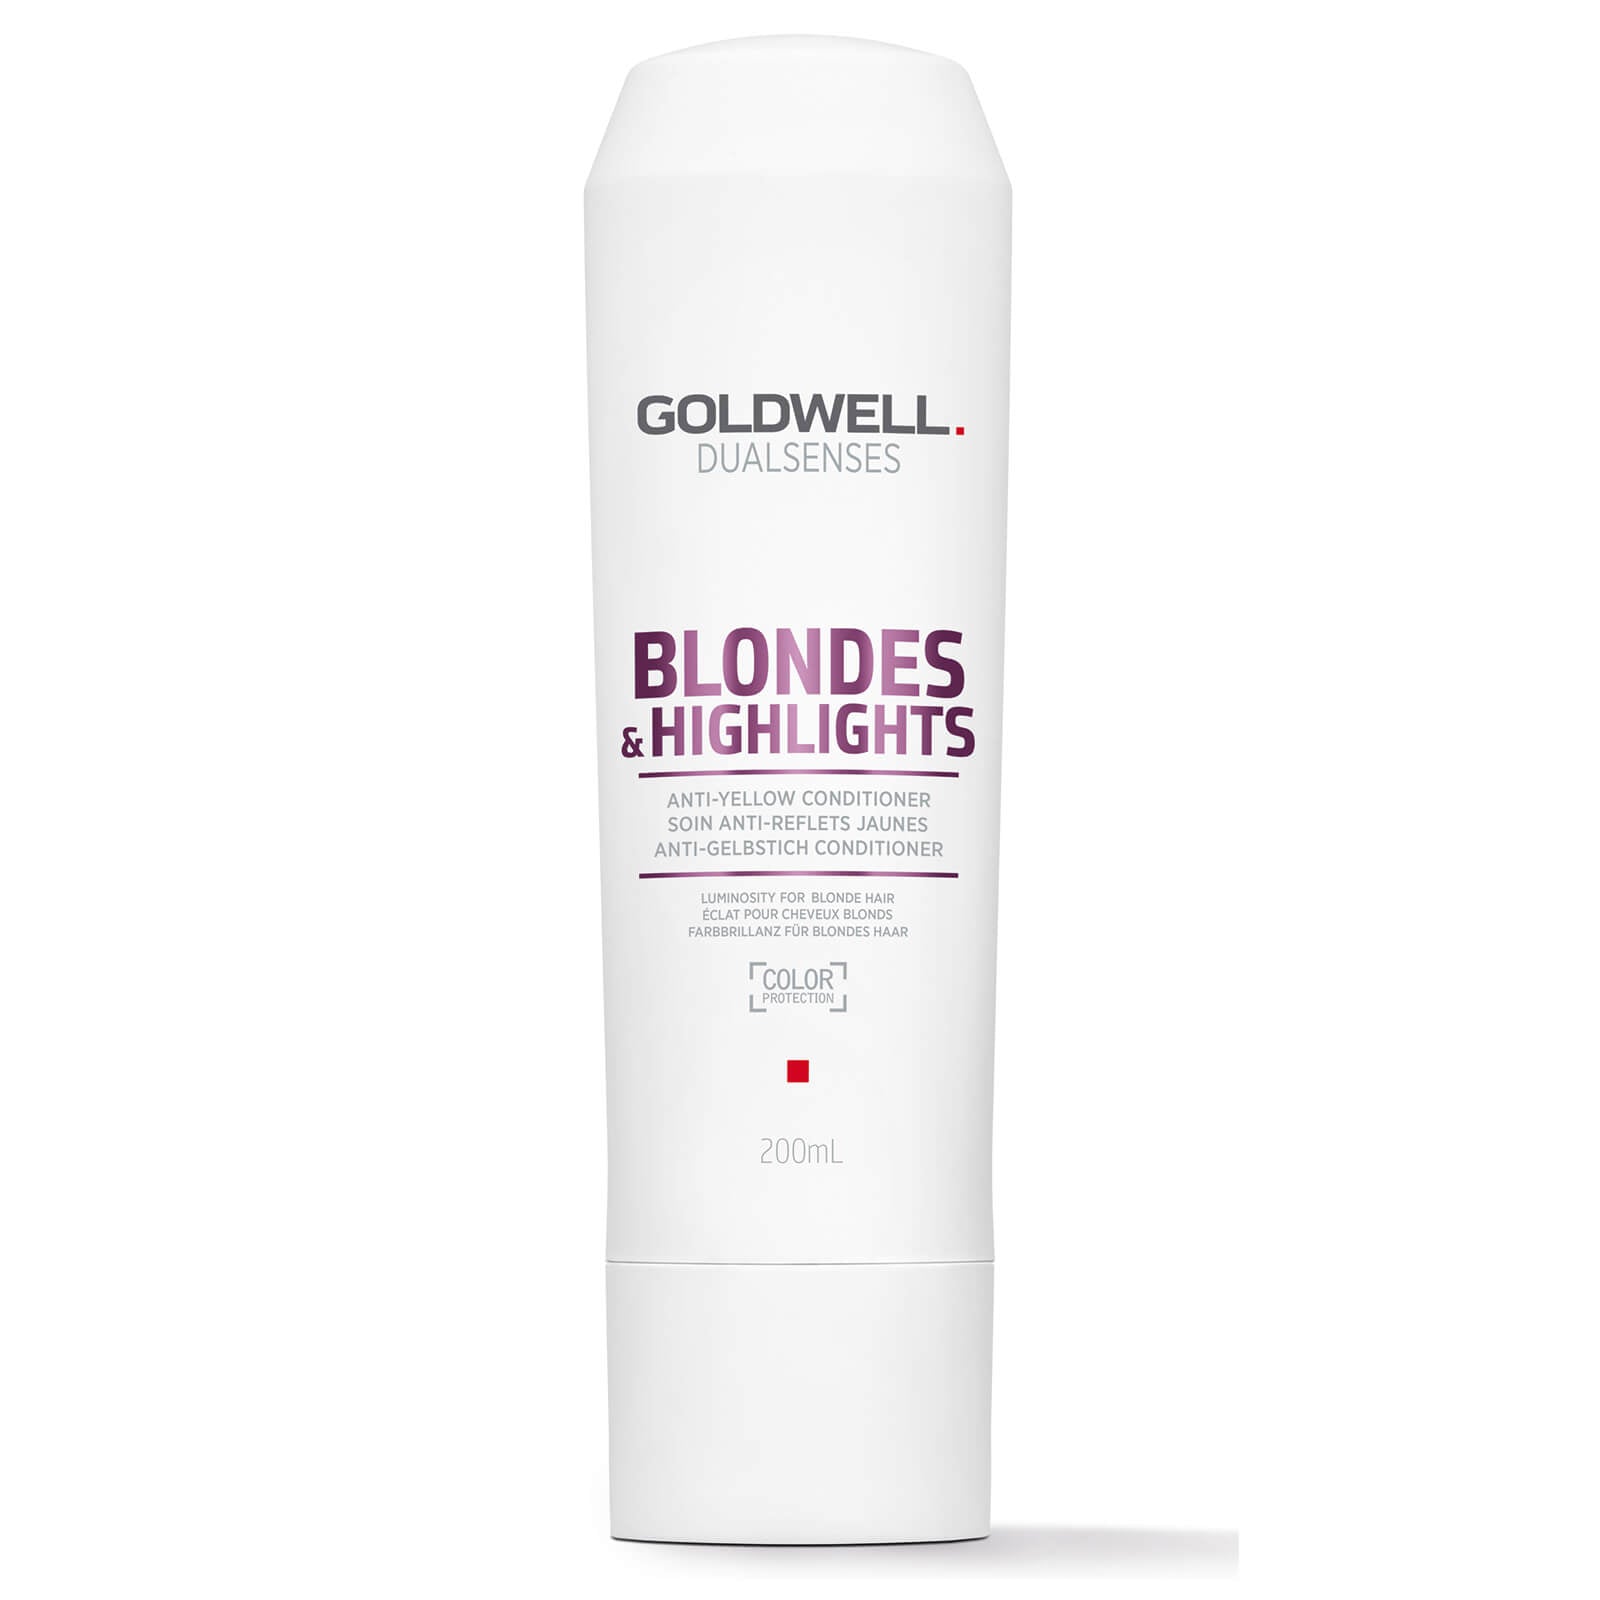 Goldwell DualSenses Blondes & Highlights Anti-Yellow Conditioner (200ml) - Ultimate Hair and Beauty